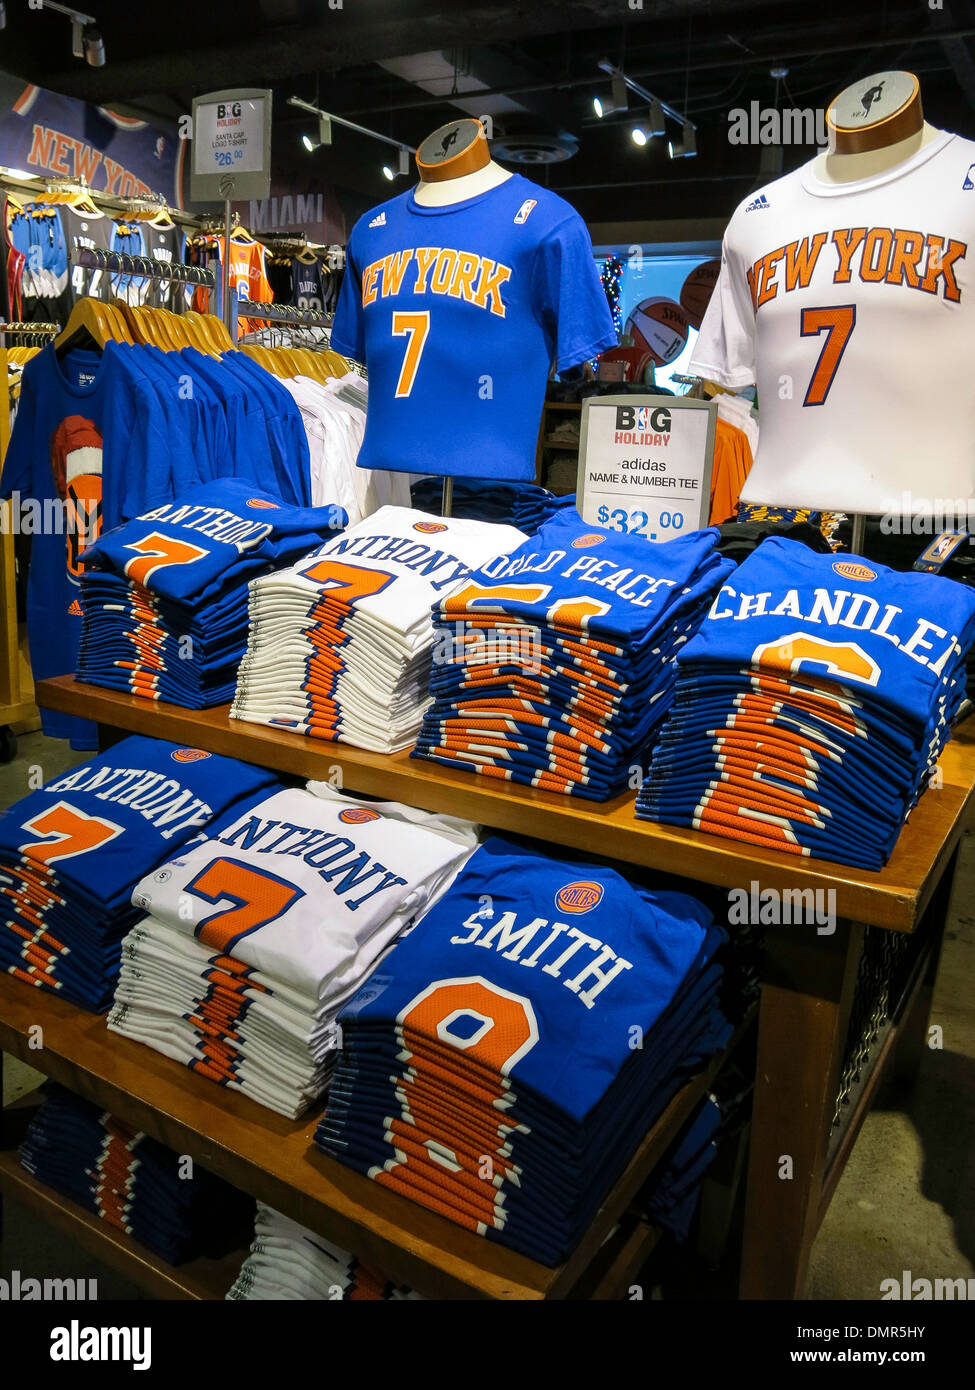 Jerseys, caps, mugs, hats and other merchandise for sale at the NBA Store  on 5th Avenue in Midtown Manhattan Stock Photo - Alamy